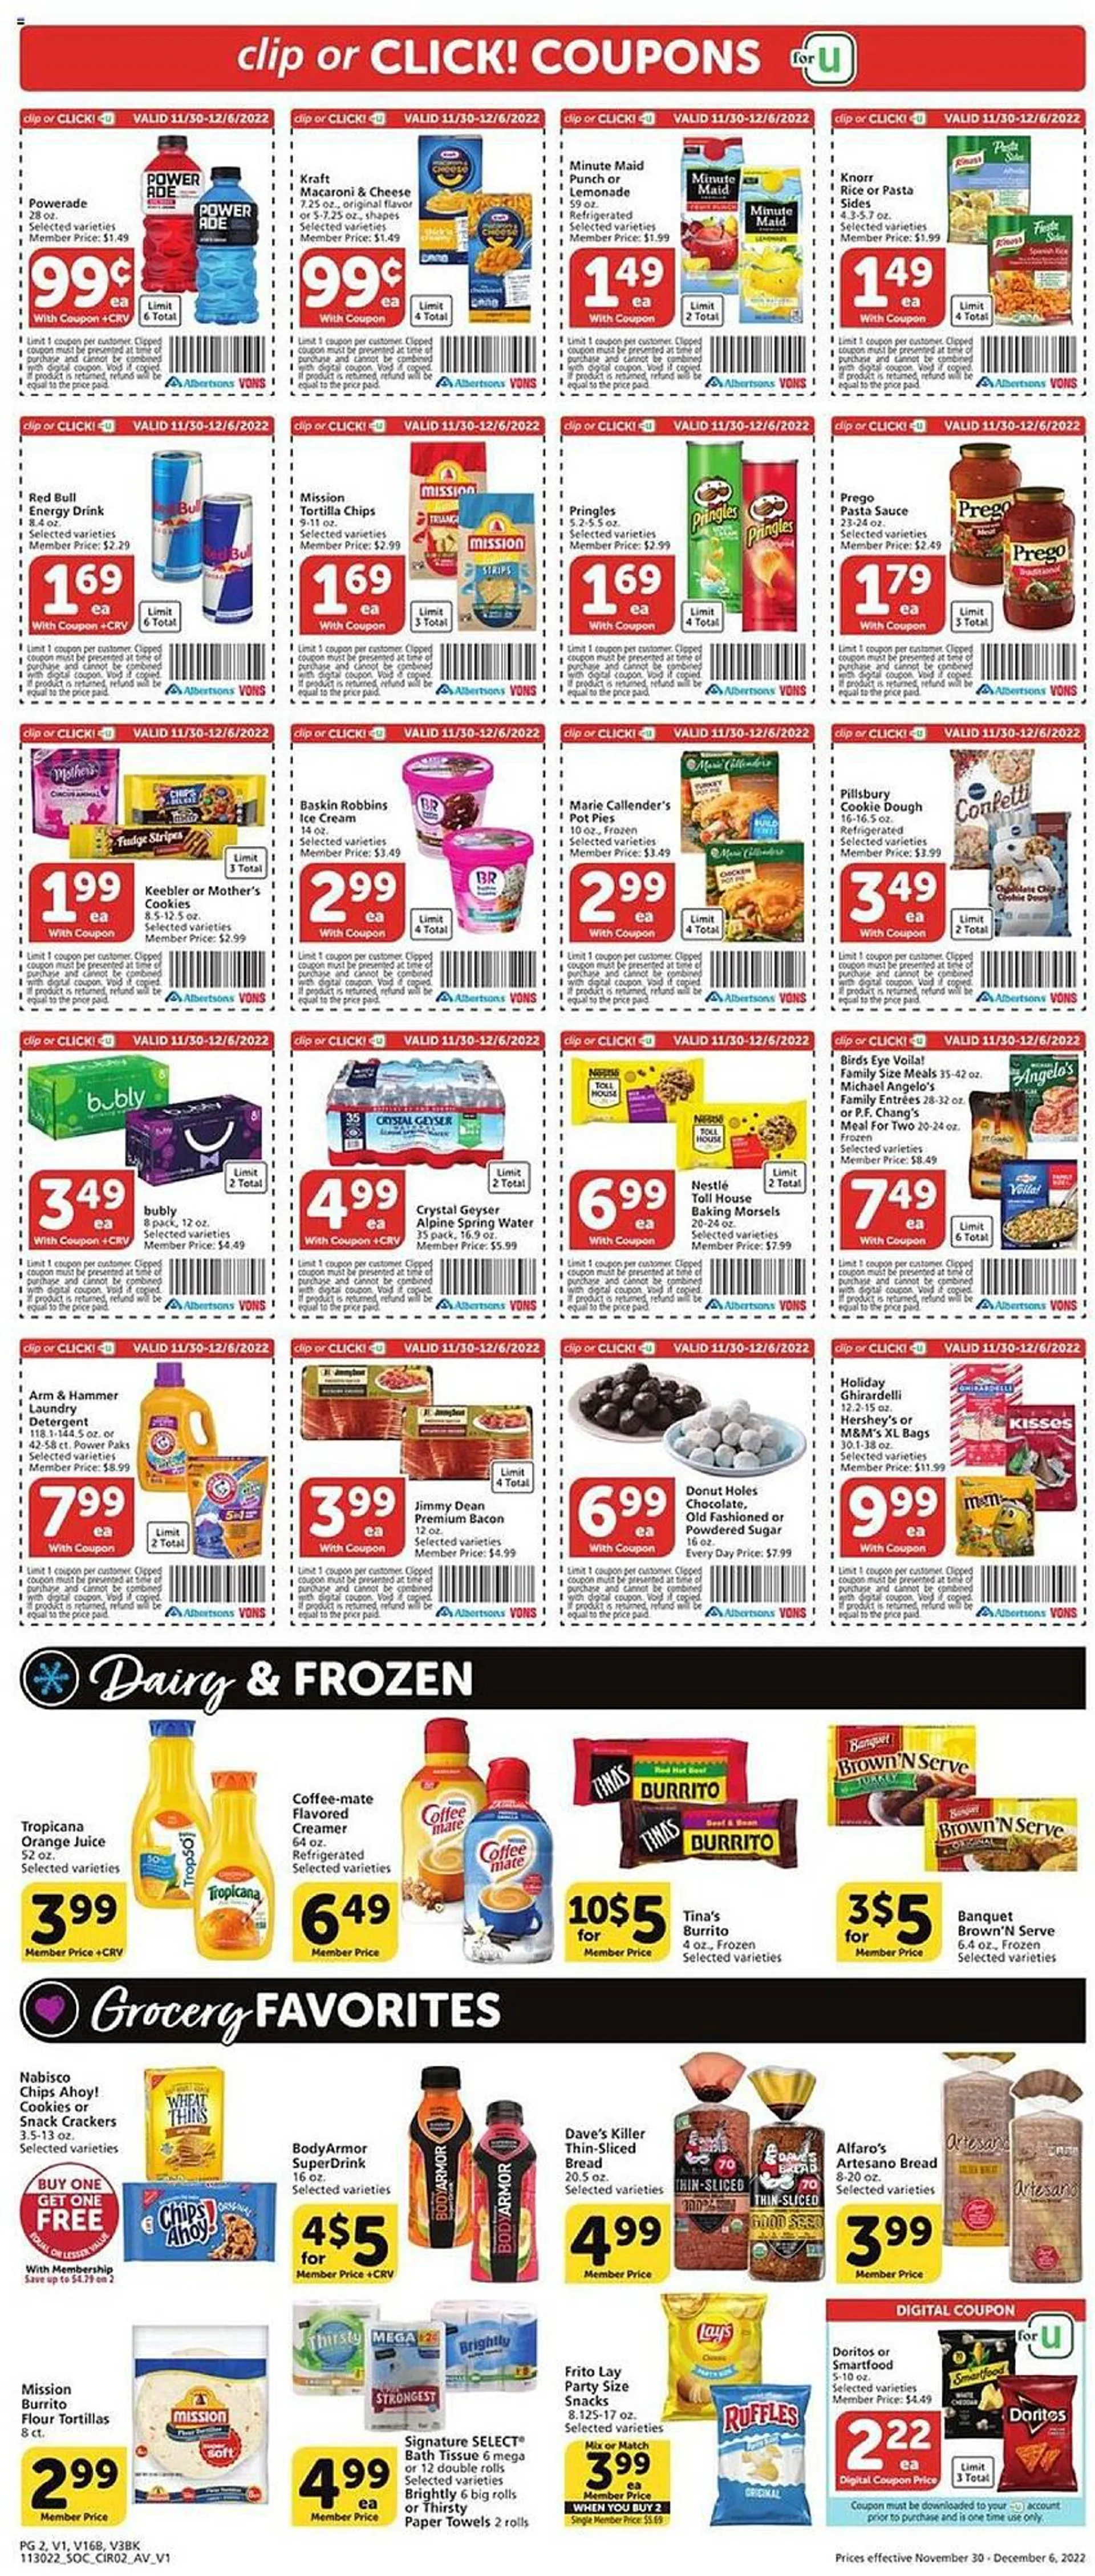 Vons Weekly Ad - 2